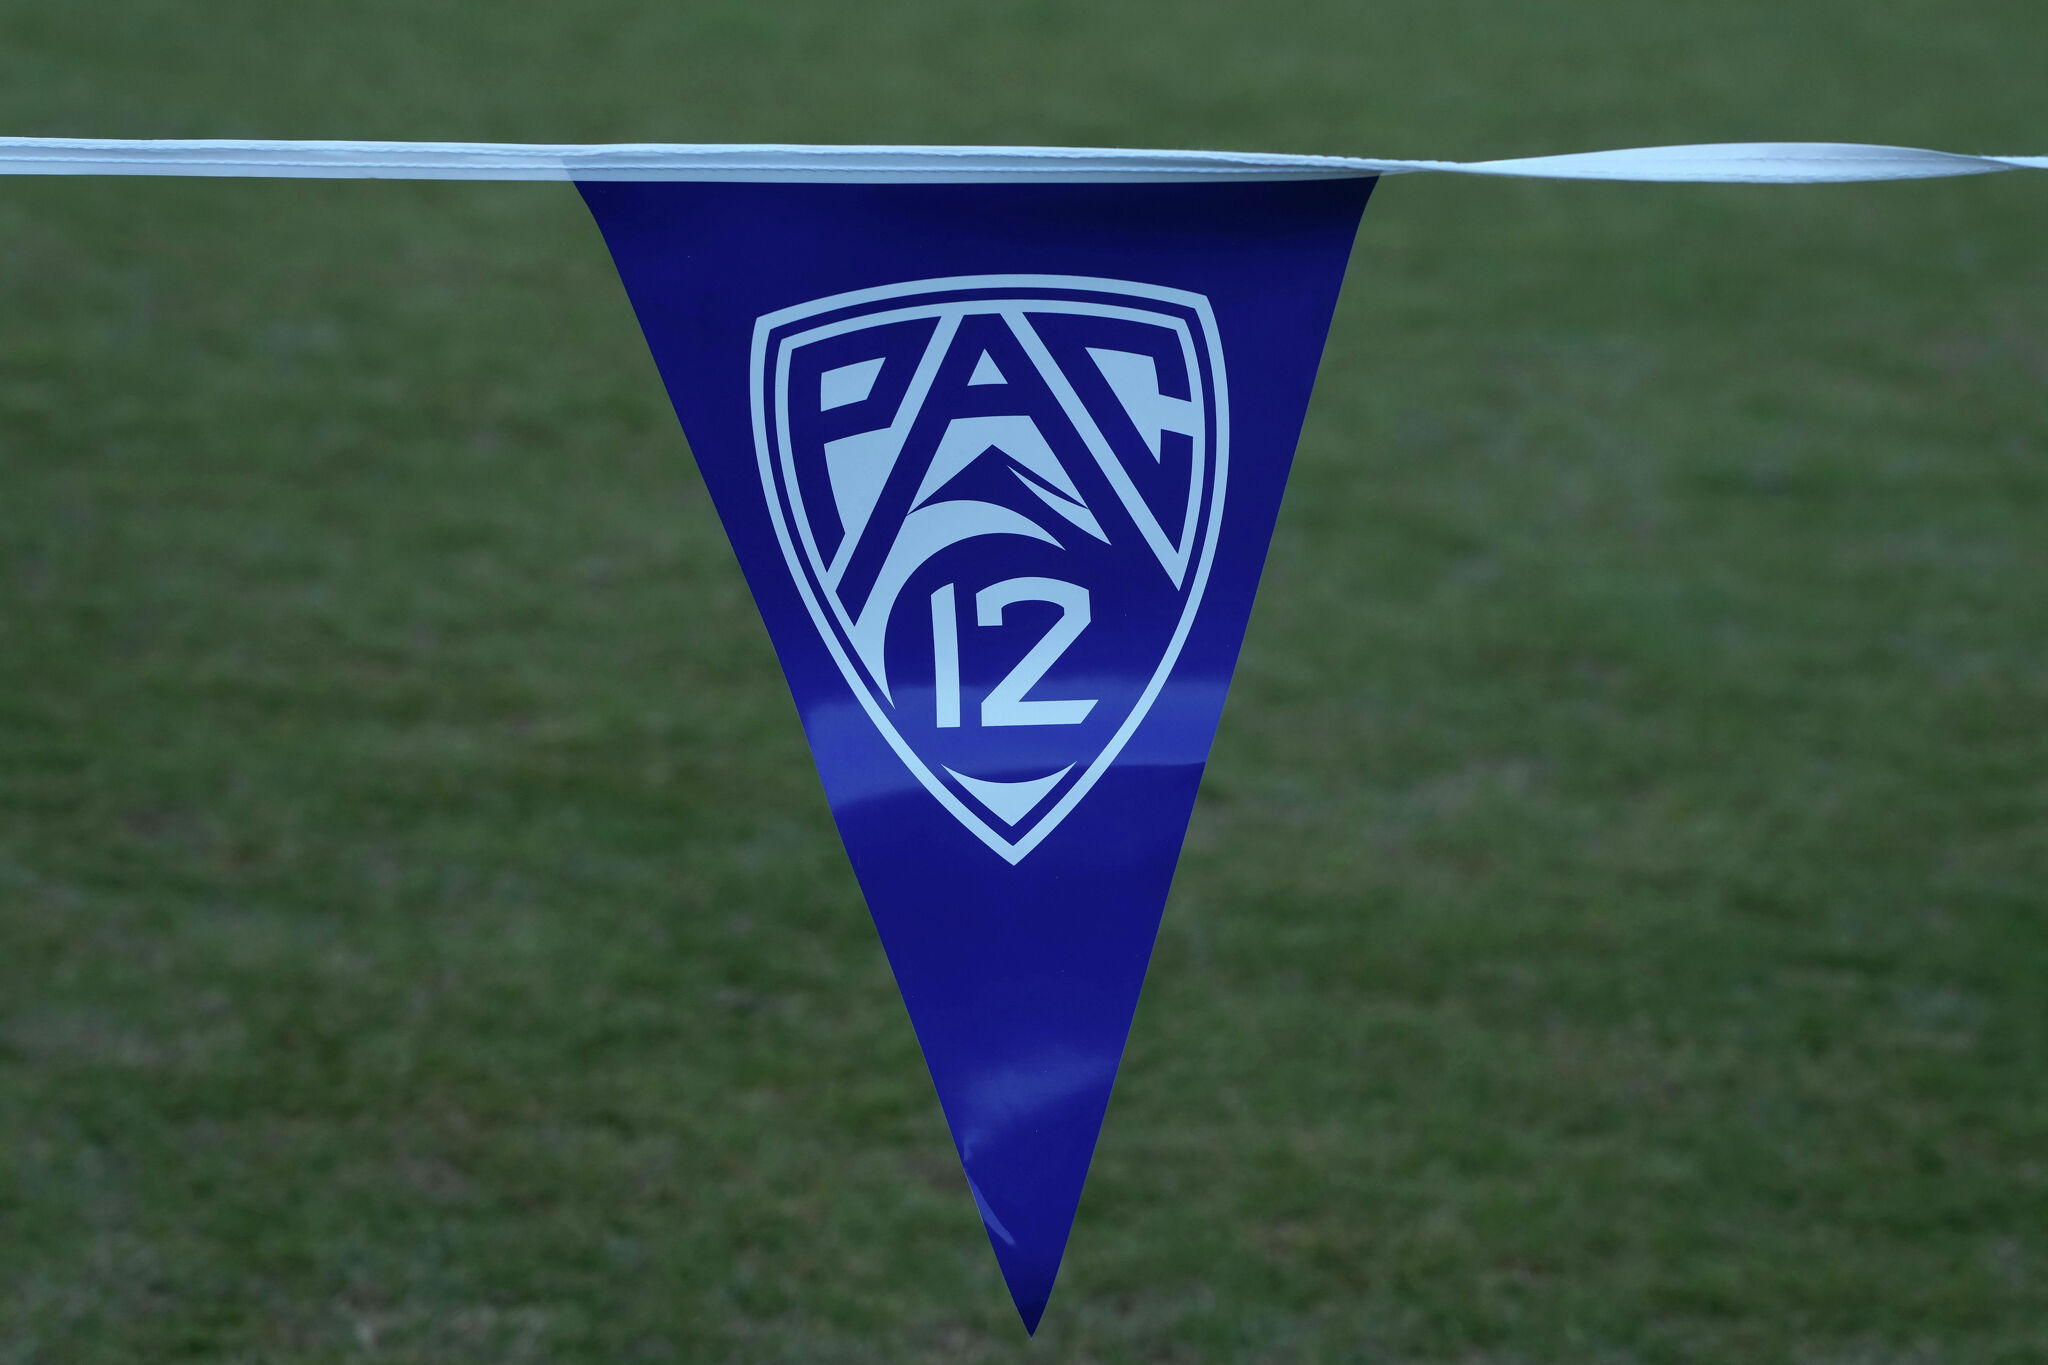 pac-12 finally sets the death date for its biggest failure, will reportedly lay off 141 employees